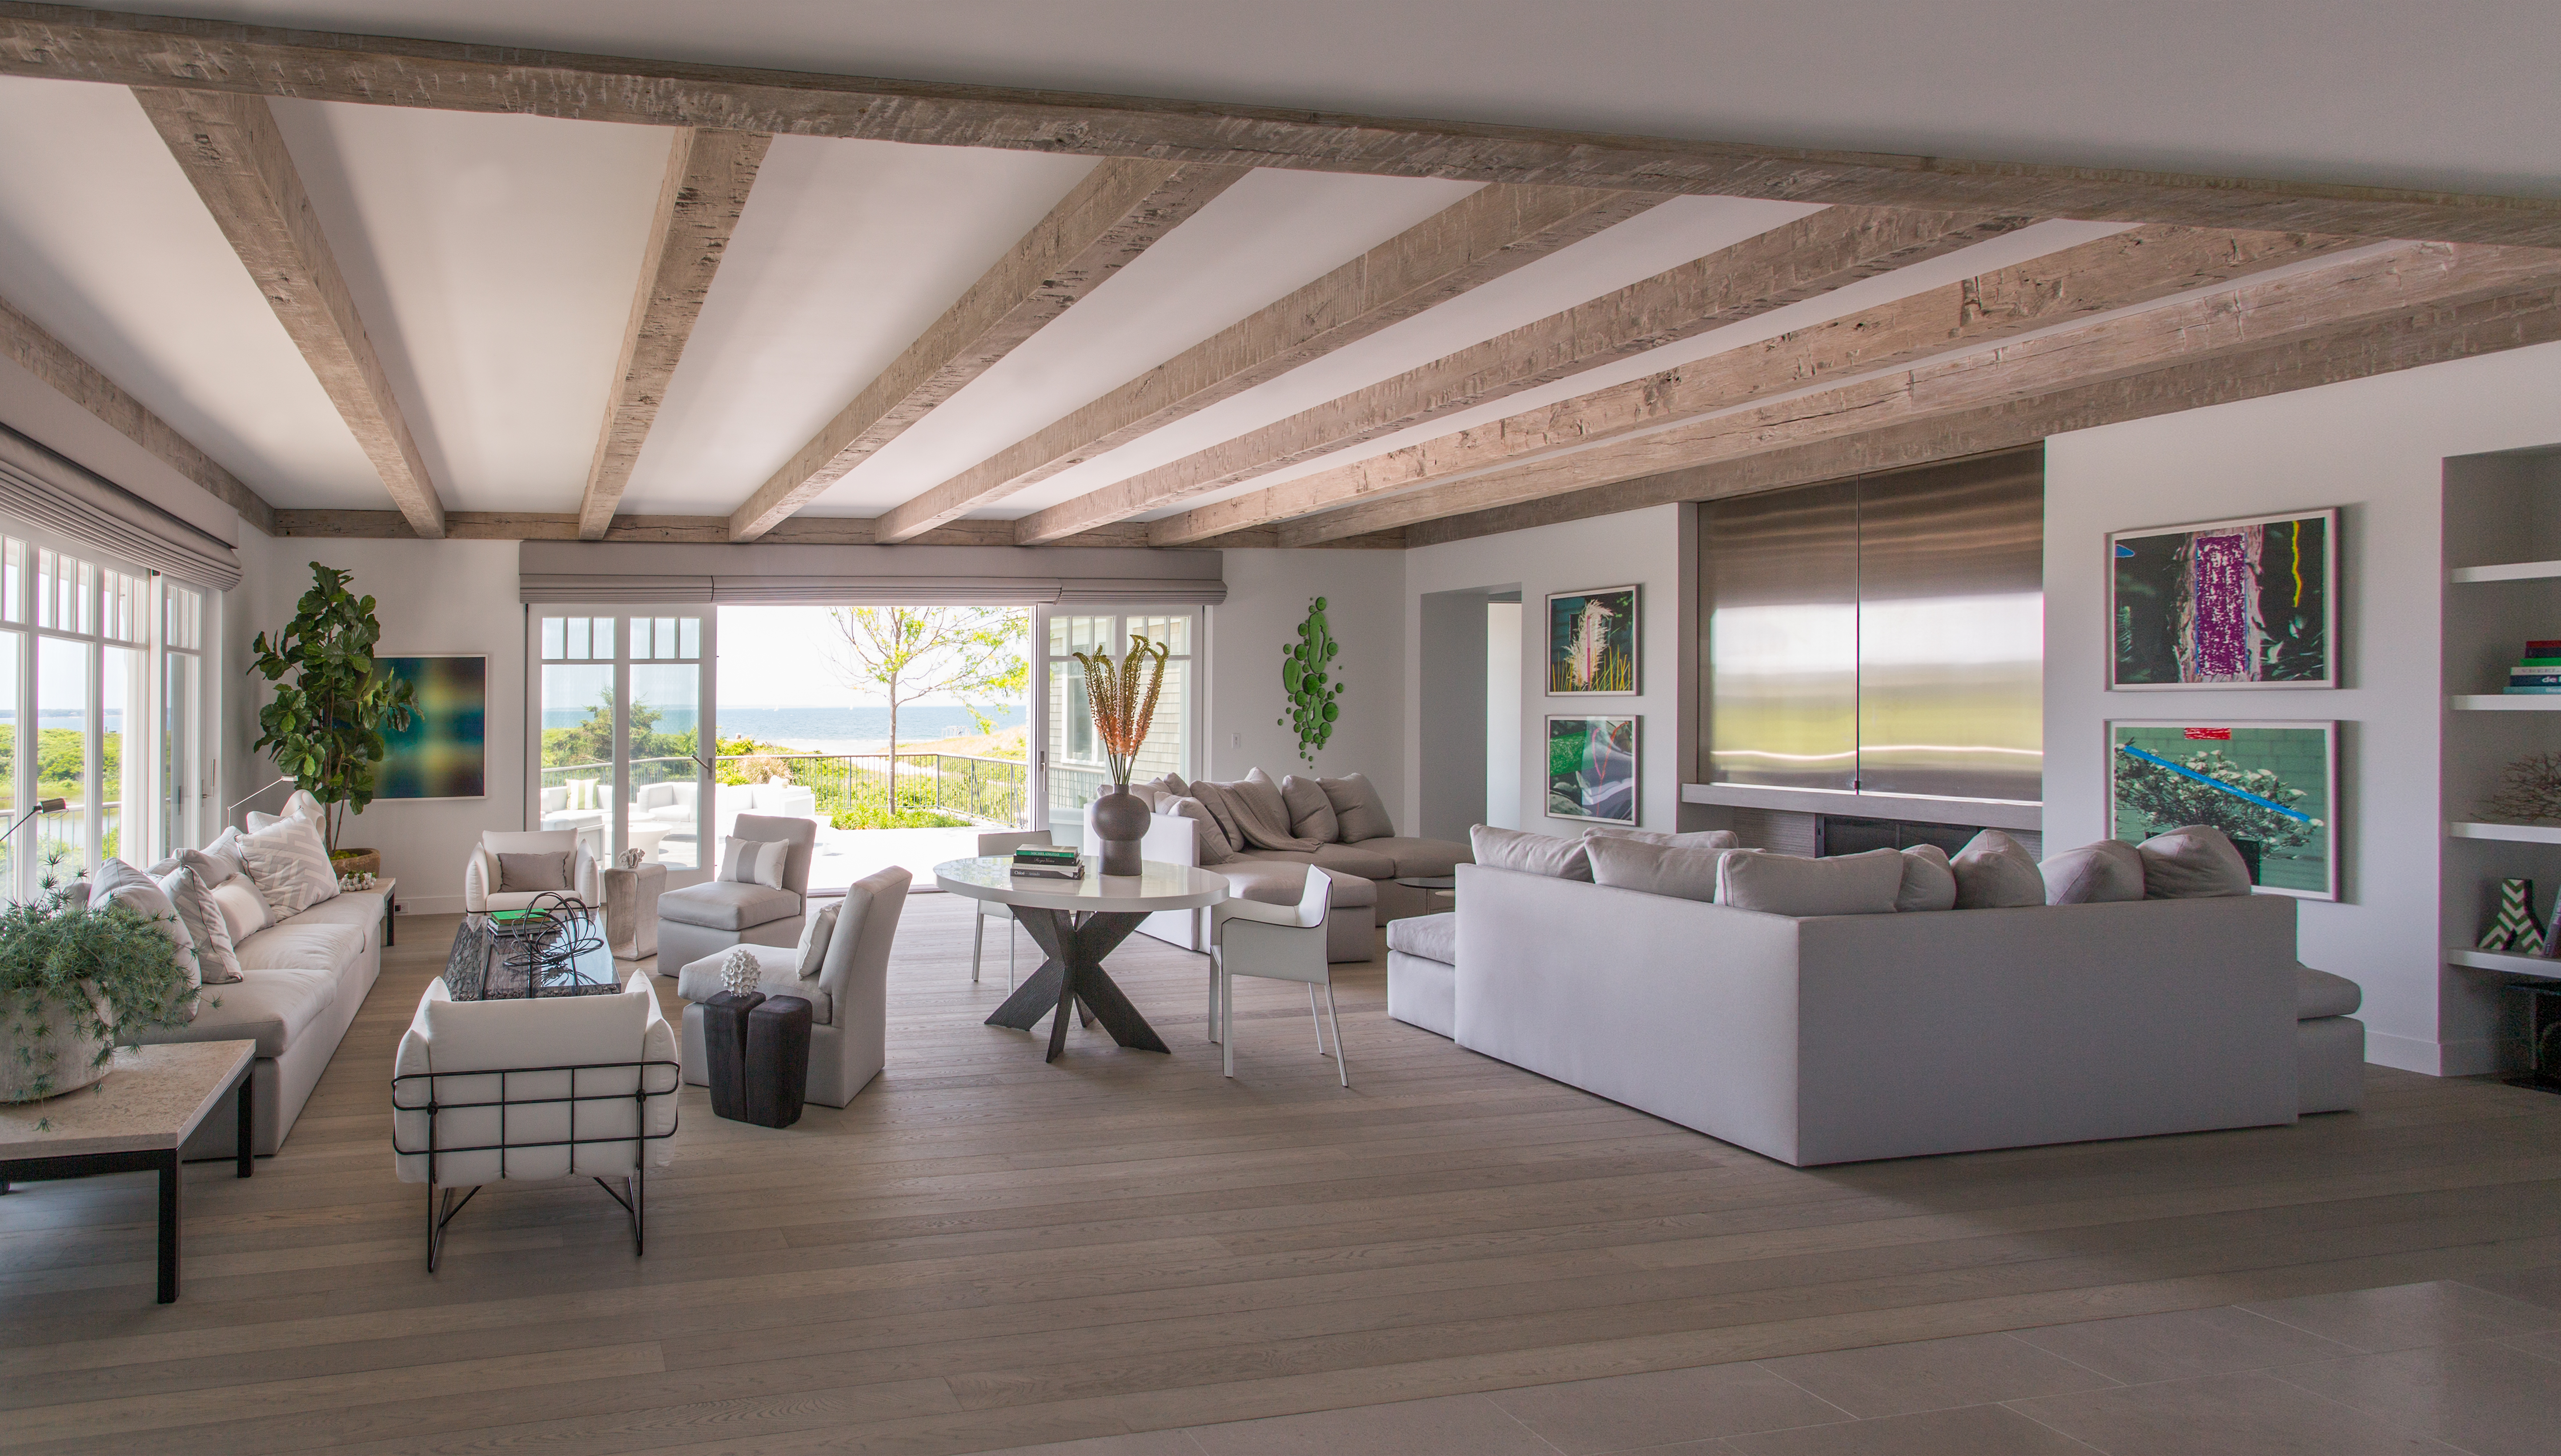 Cape Cod Getaway In Architectural Digest Hutker Architects